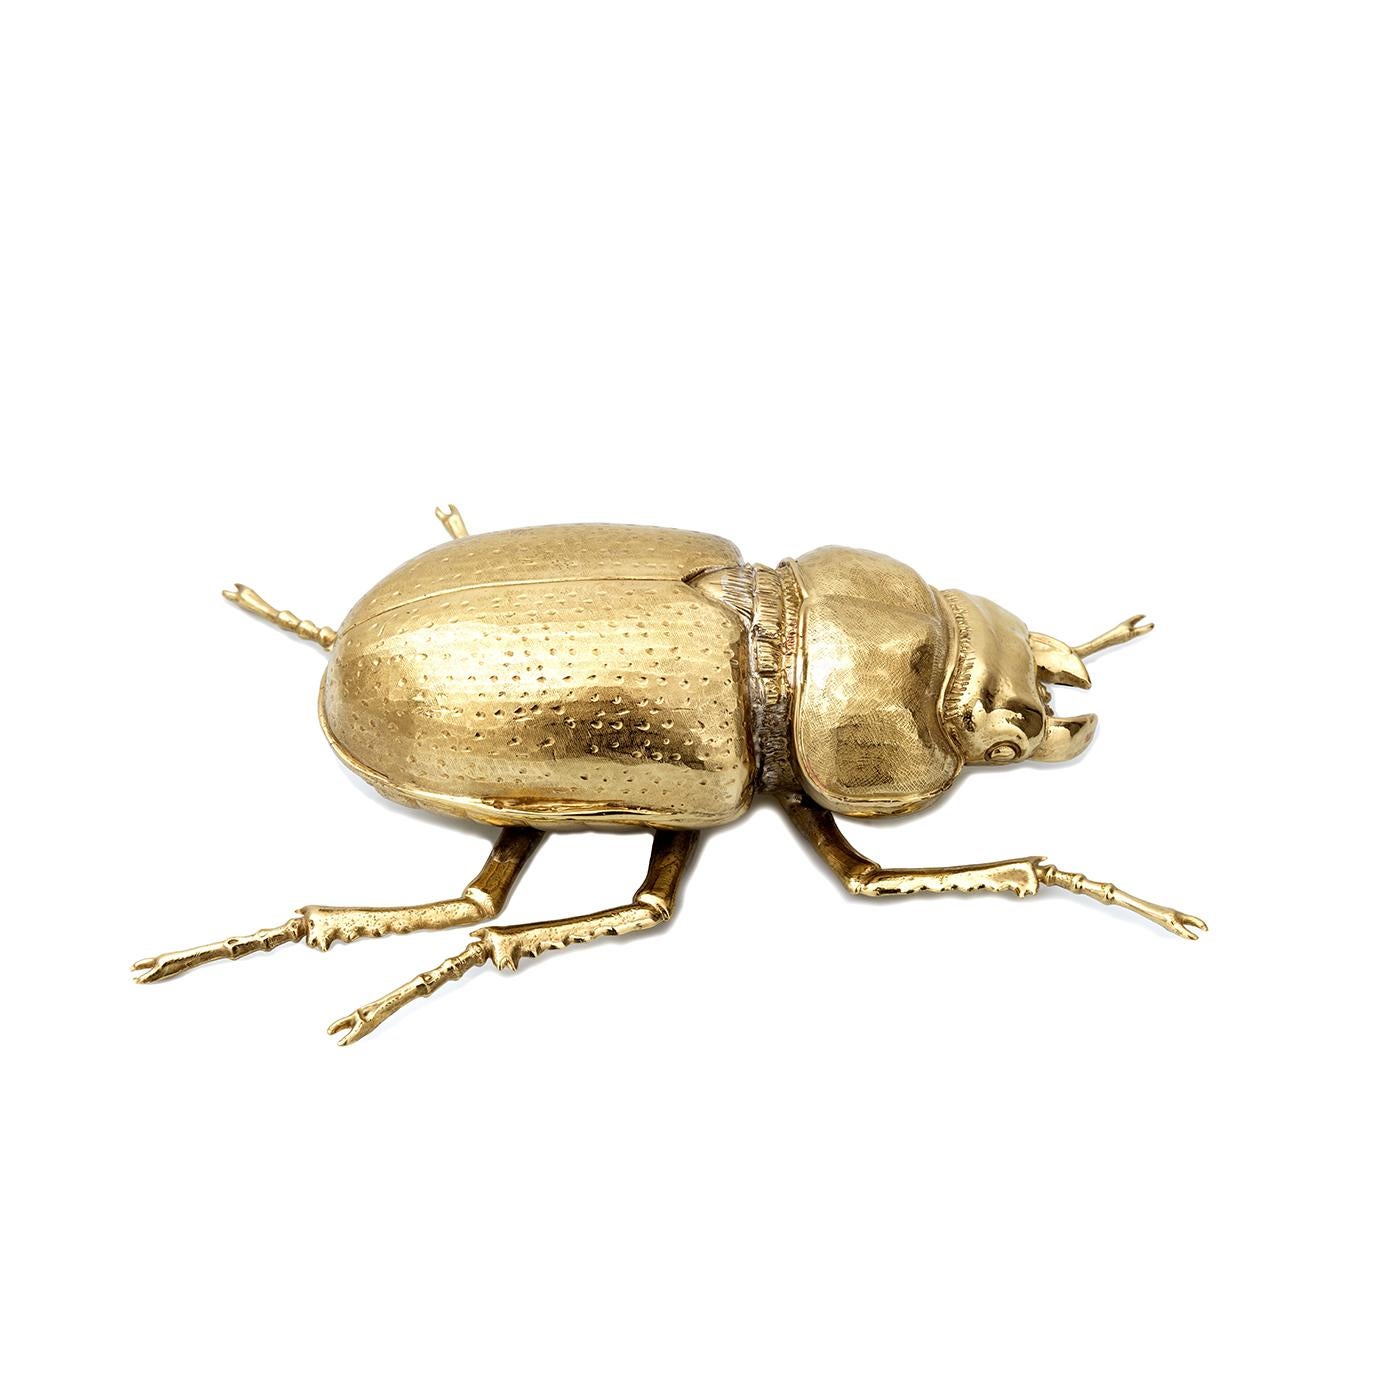 Made entirely by hand from a block of bronze, the Scarab Paperweight—by Florentine luxury experts Badari—offers eternal charm and allure. Hailed by ancient Egyptians, the scarab is back, adding a bold accent while keeping papers neat. The original